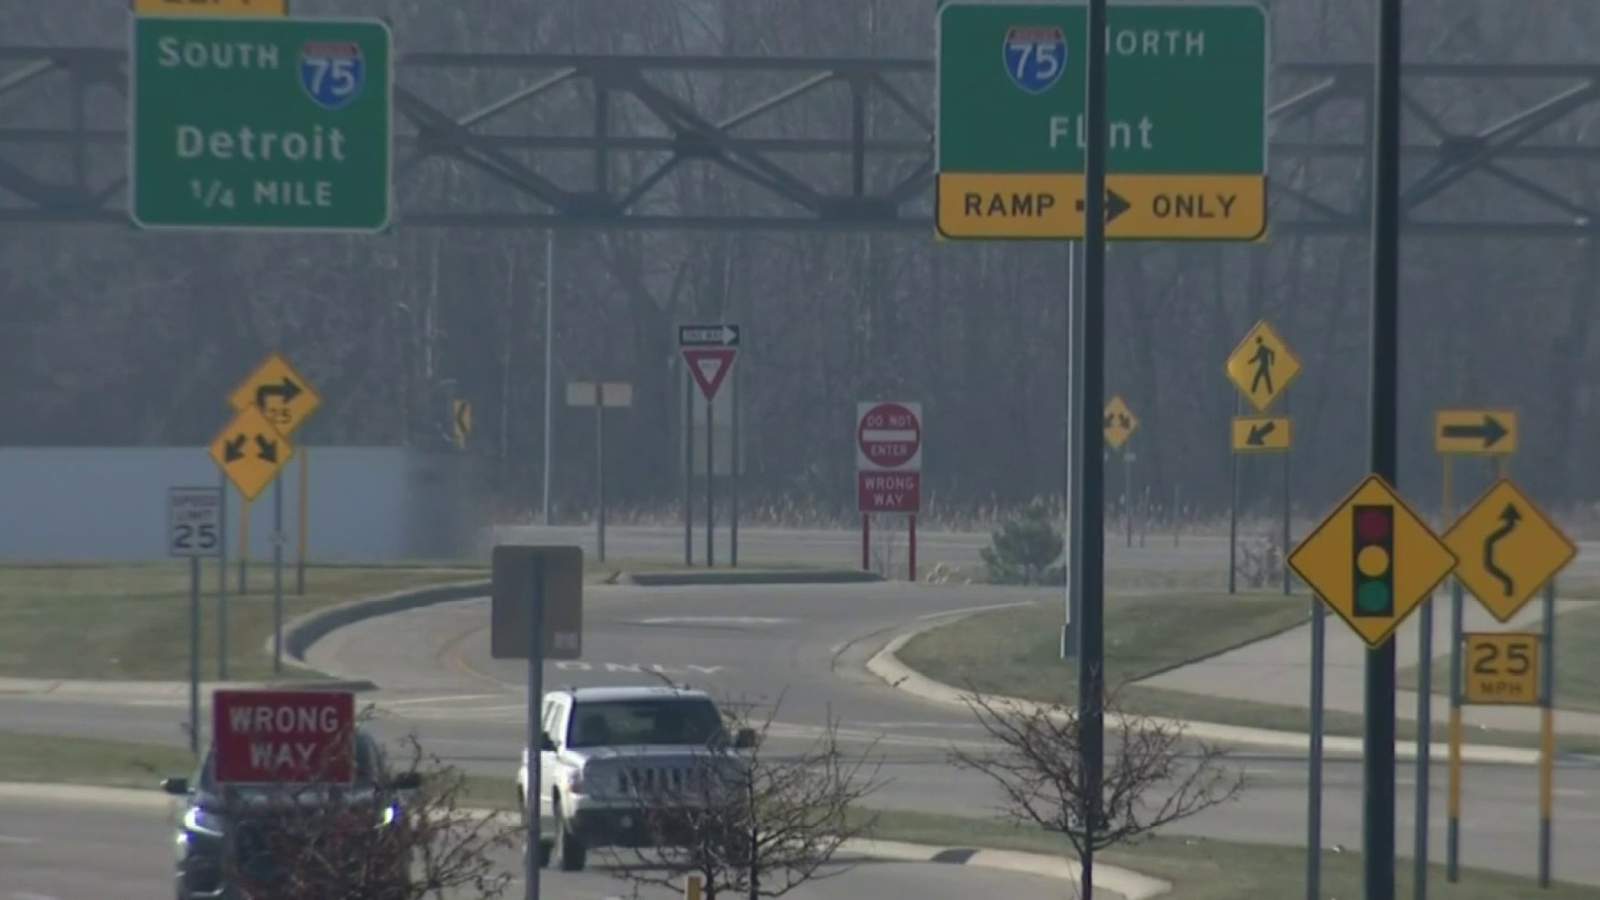 I-75 modernization project aims for safer, less confusing intersections